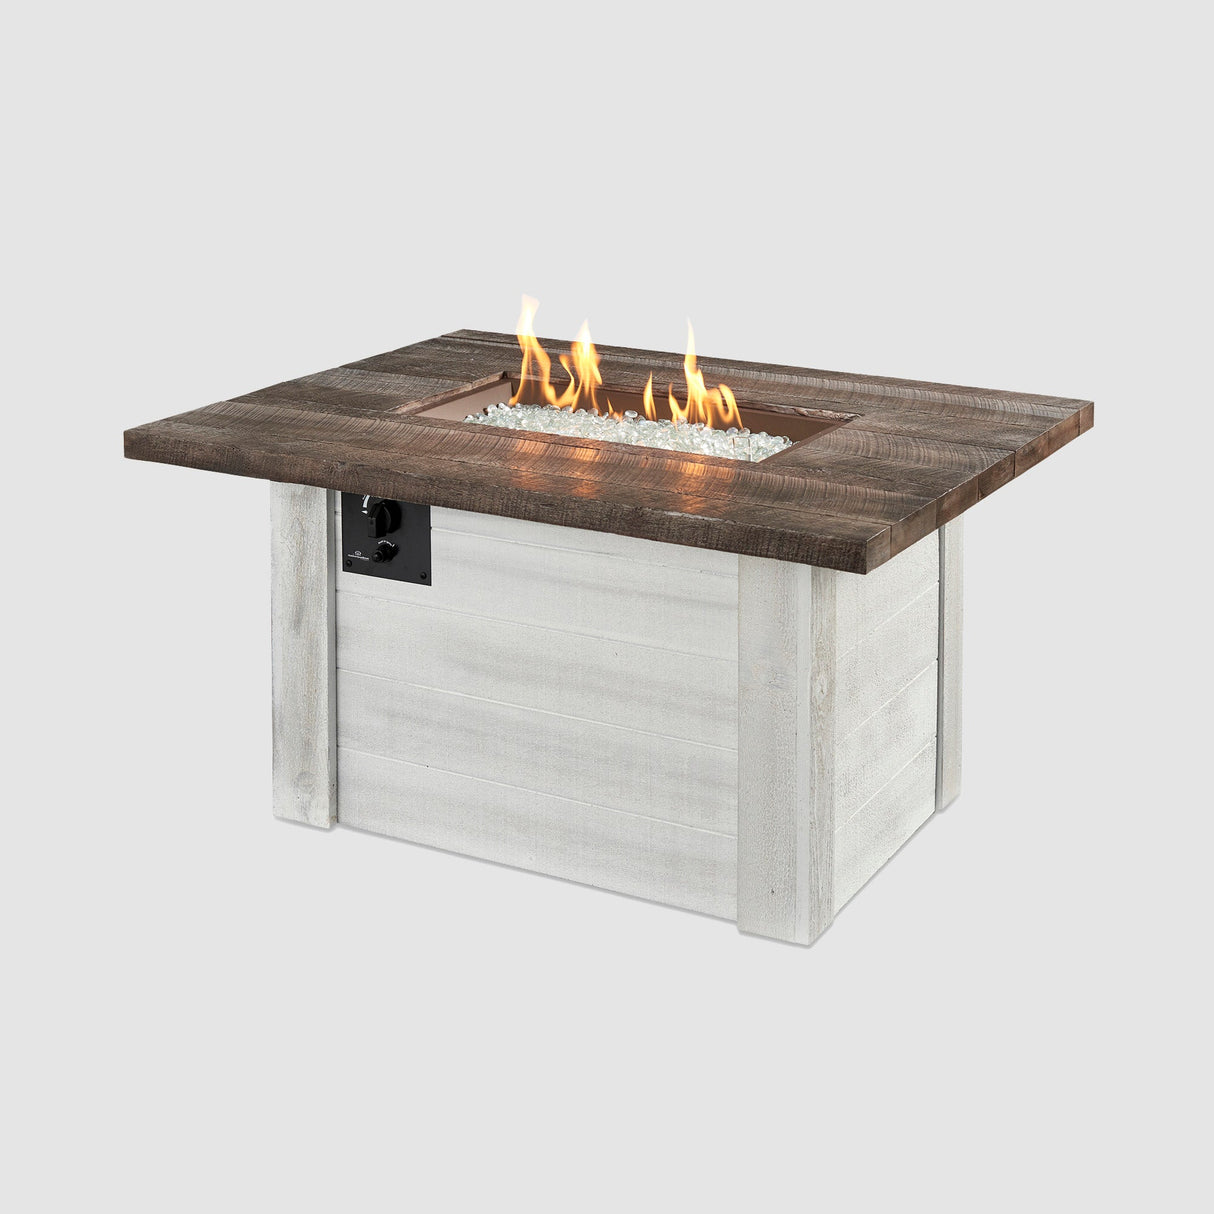 Alcott Rectangular Gas Fire Pit Table on a grey background